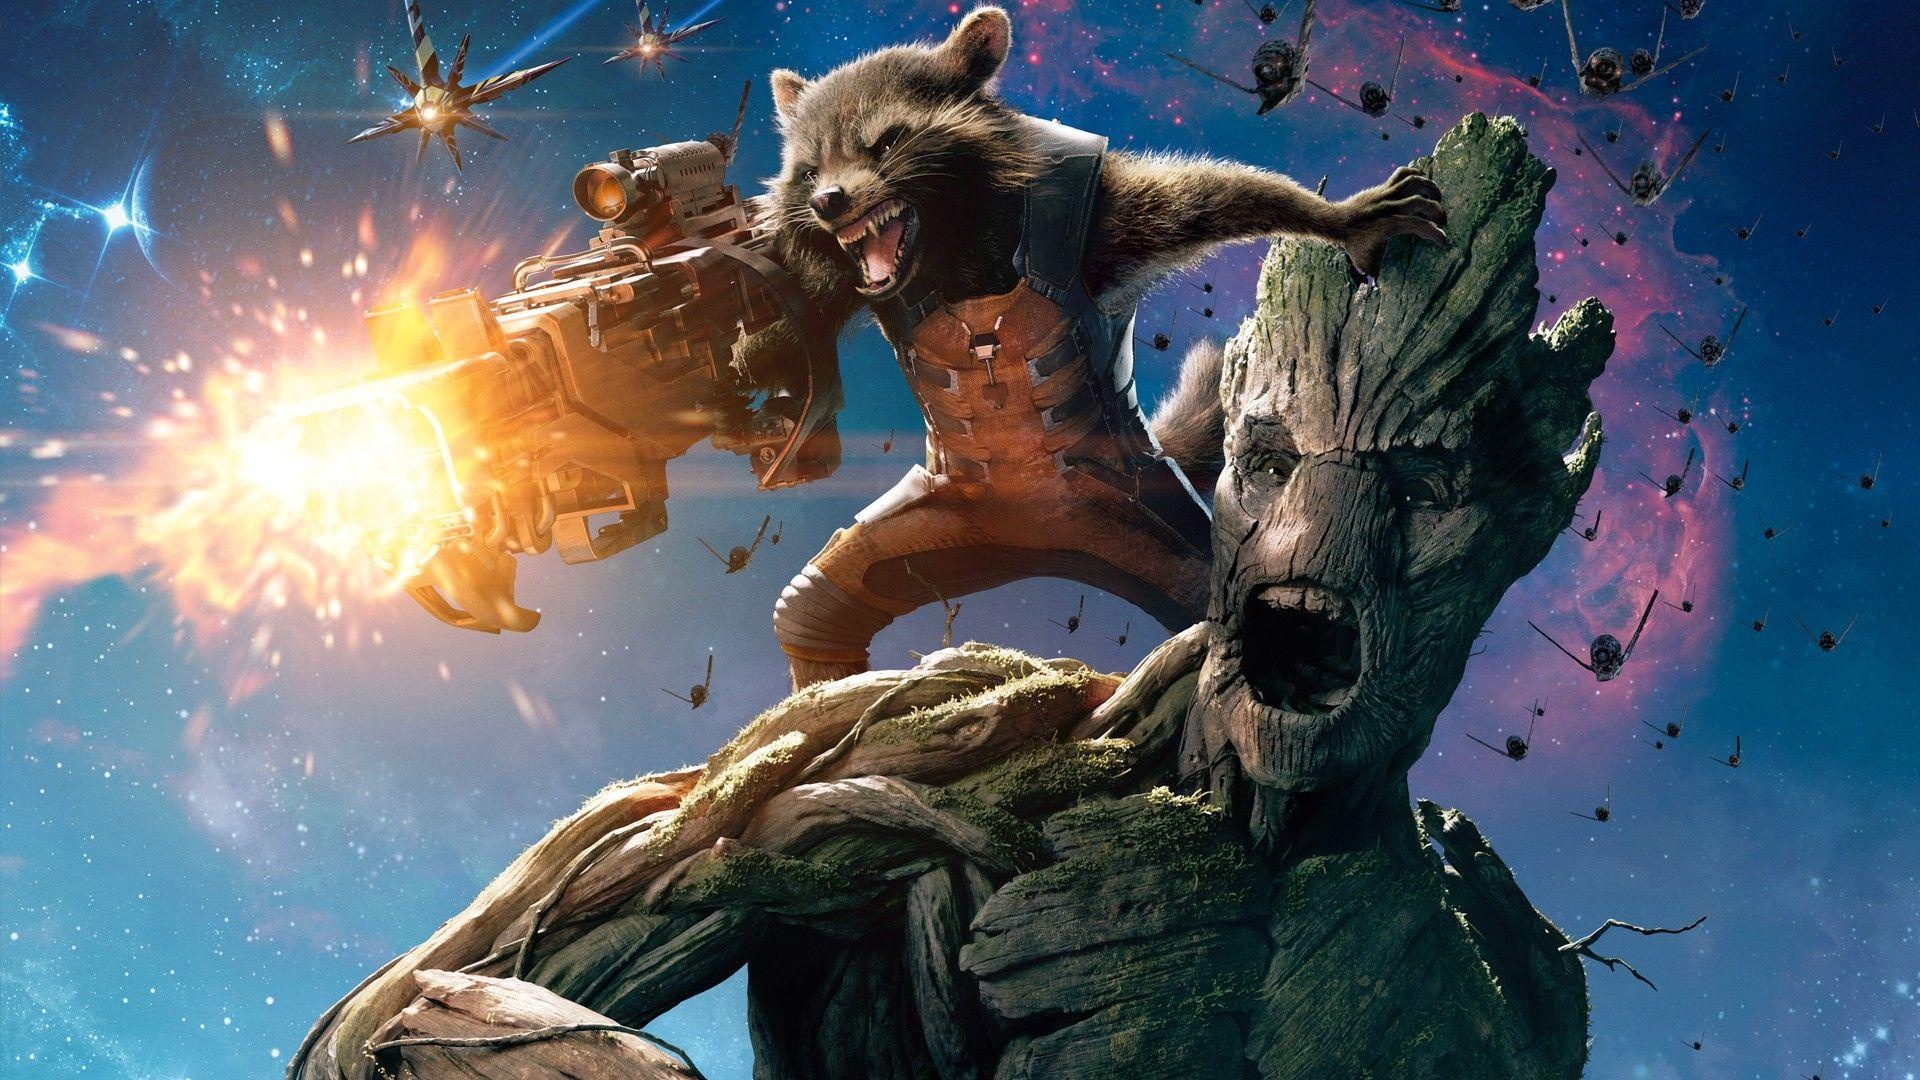 Rocket and Groot, Dynamic wallpapers, Marvel characters, Cool backgrounds, 1920x1080 Full HD Desktop